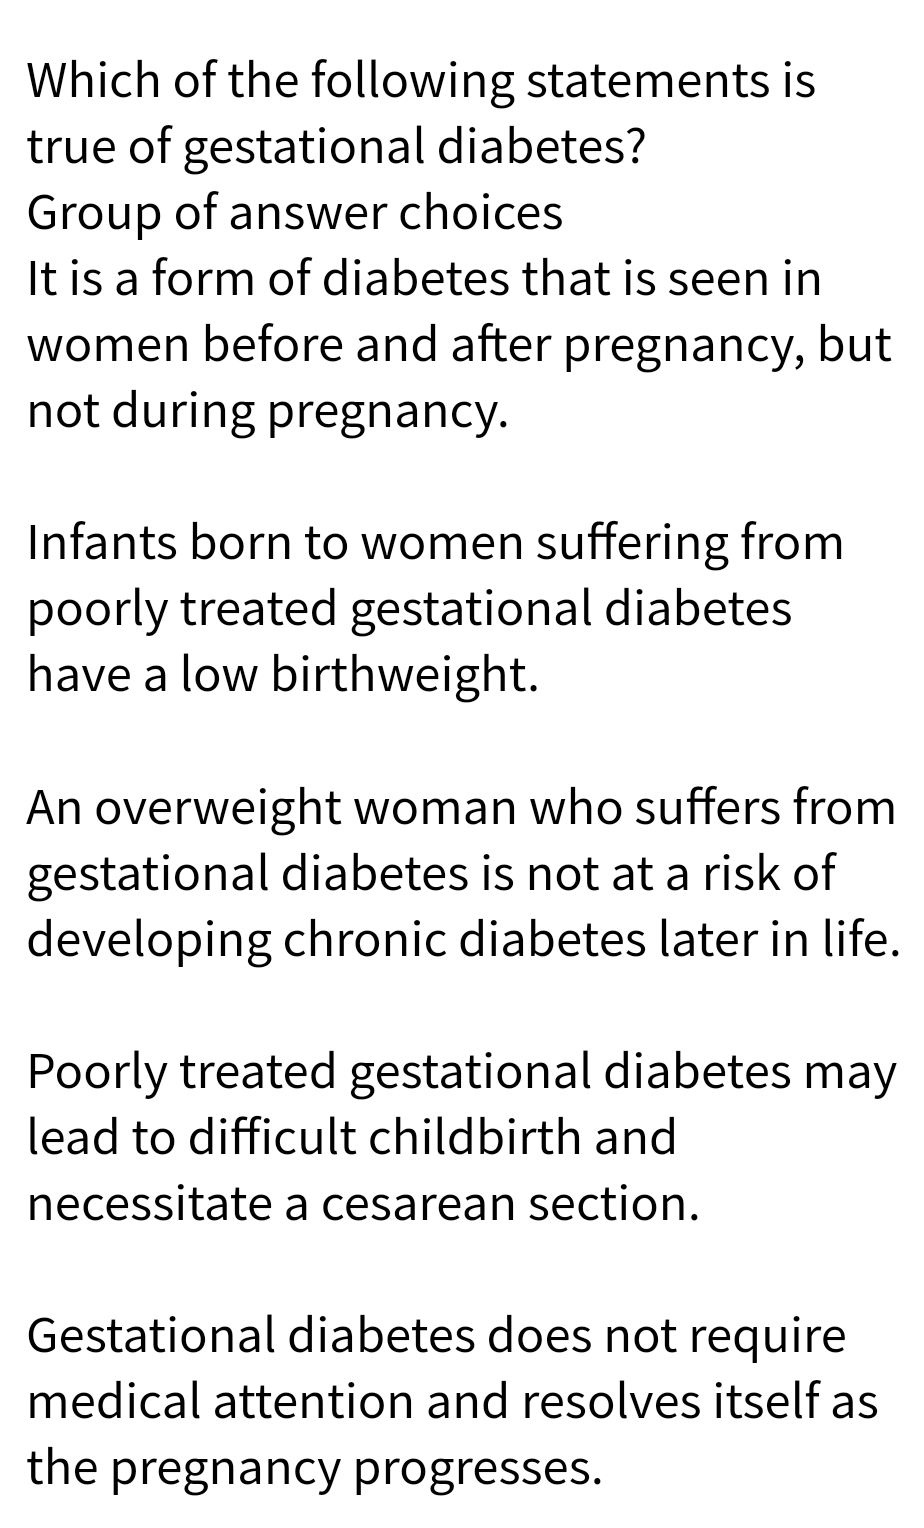 Which of the following statements is
true of gestational diabetes?
Group of answer choices
It is a form of diabetes that is seen in
women before and after pregnancy, but
not during pregnancy.
Infants born to women suffering from
poorly treated gestational diabetes
have a low birthweight.
An overweight woman who suffers from
gestational diabetes is not at a risk of
developing chronic diabetes later in life.
Poorly treated gestational diabetes may
lead to difficult childbirth and
necessitate a cesarean section.
Gestational diabetes does not require
medical attention and resolves itself as
the pregnancy progresses.